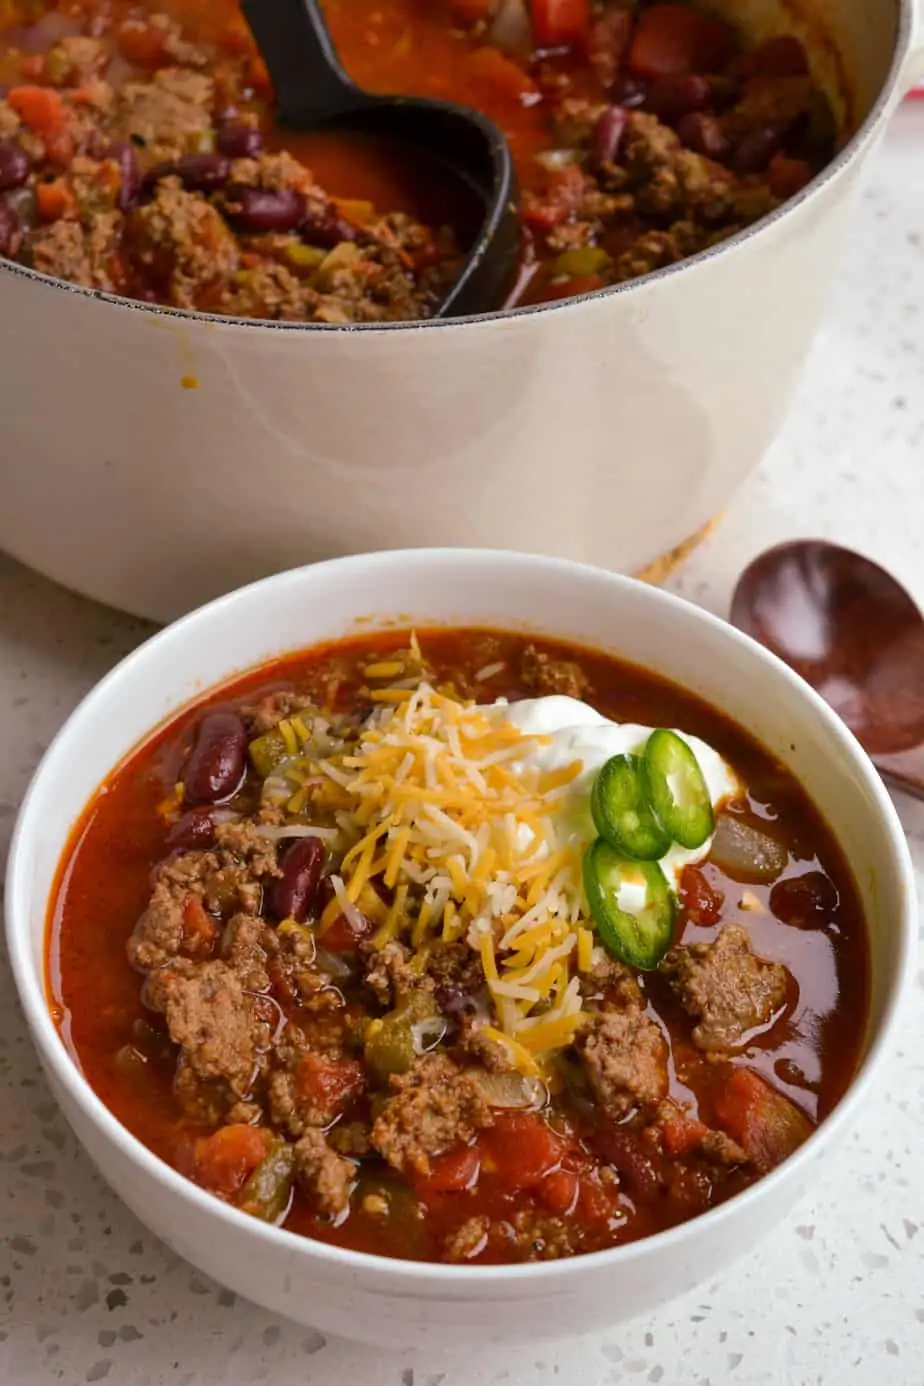 The Best Chili Recipe is the ultimate balance of spicy and thick with a touch of brown sugar sweetness.